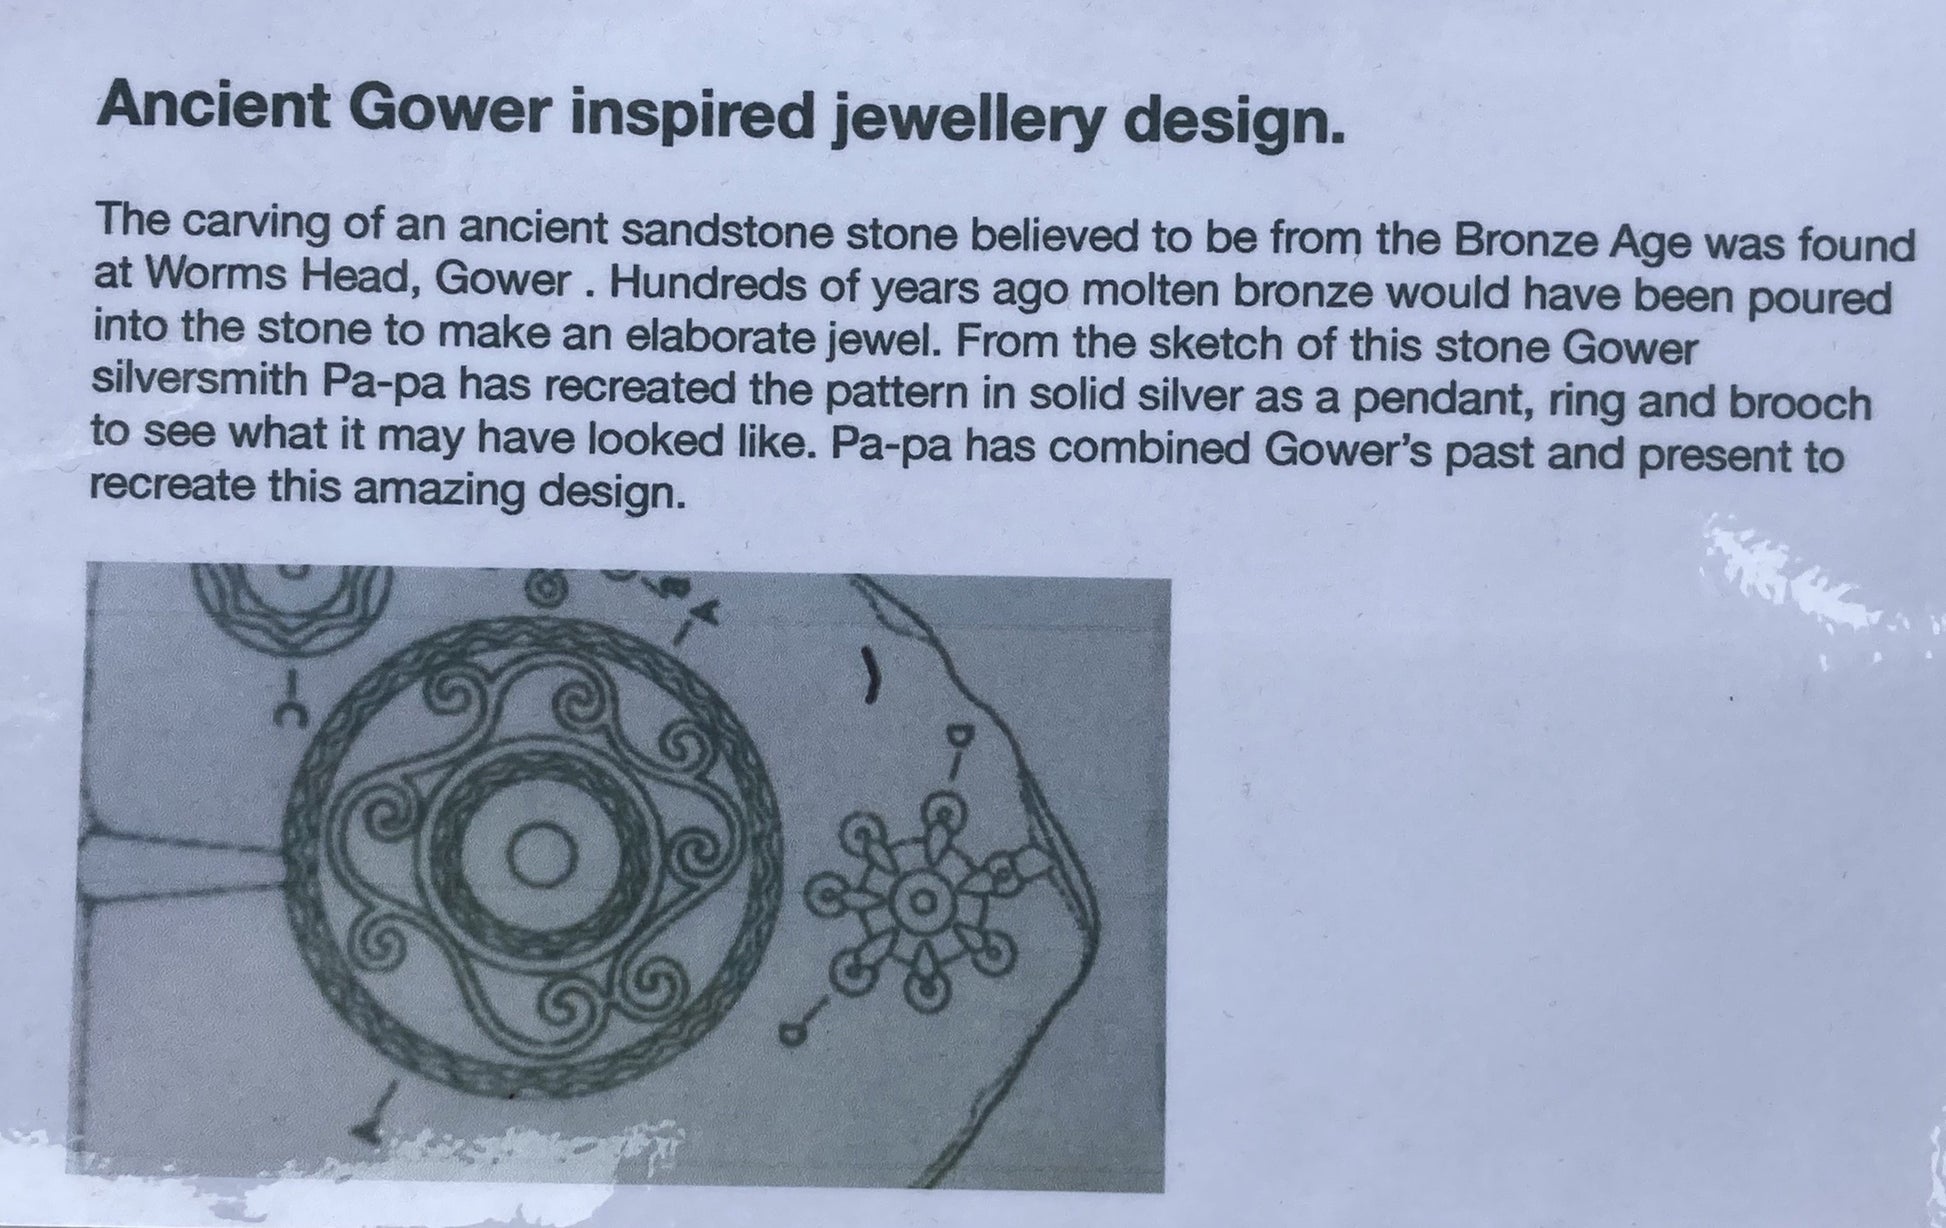 Copy of original Drawing of bronze age carving in sandstone found on Gower.